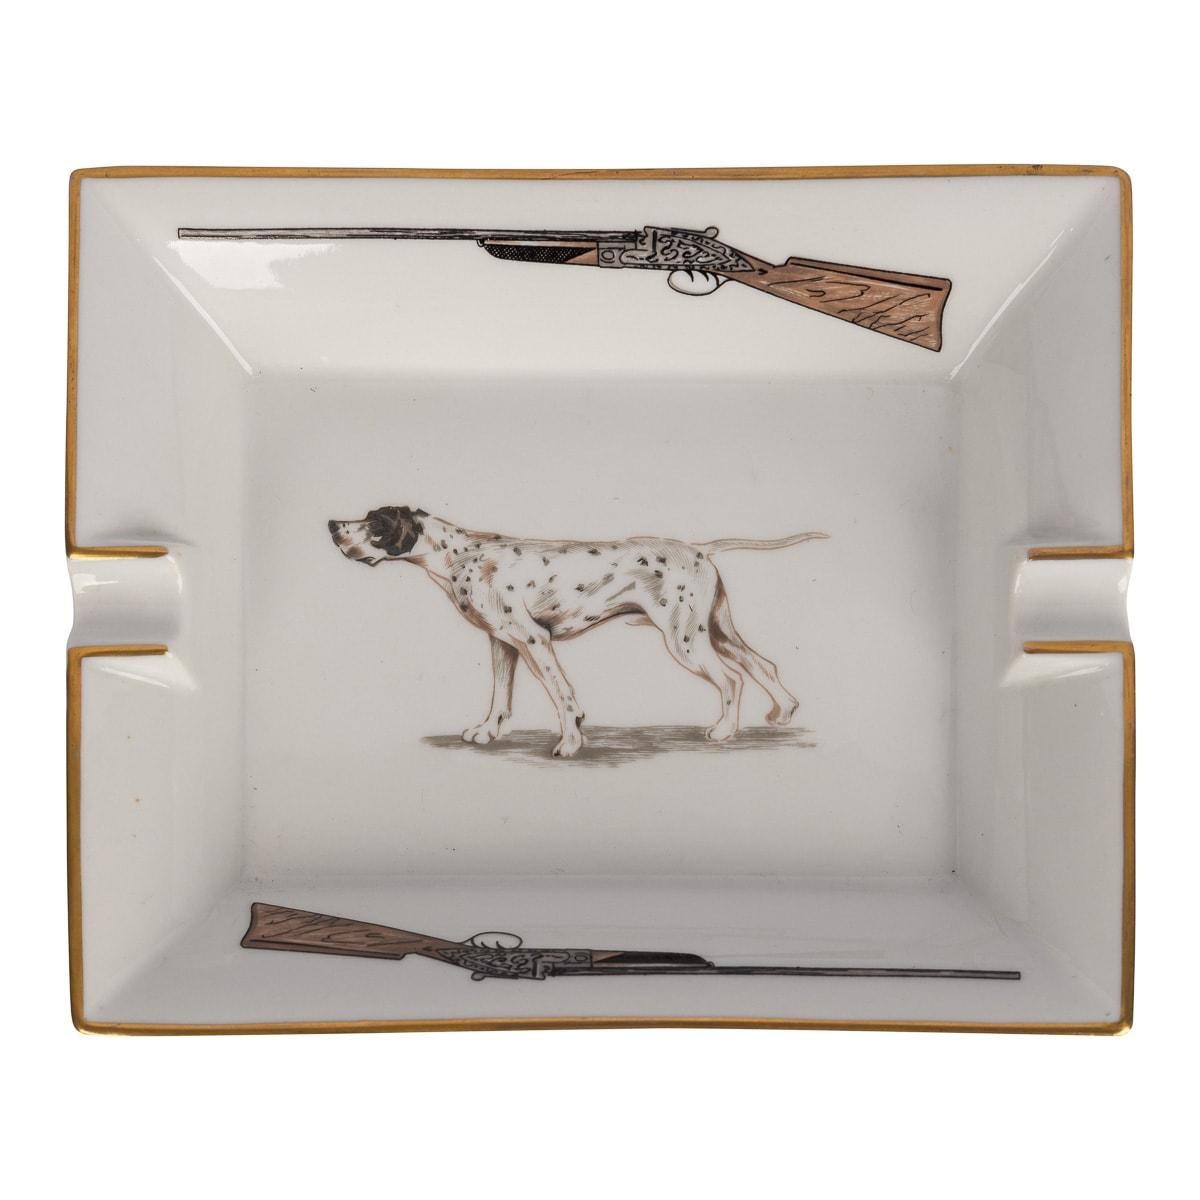 A ceramic ashtray by Hermes, made in France in the latter half of the 20th century. These ashtrays have always been very collectable with the vintage models in particular. This one has a hunting theme, featuring a shotgun and hound, a lovely